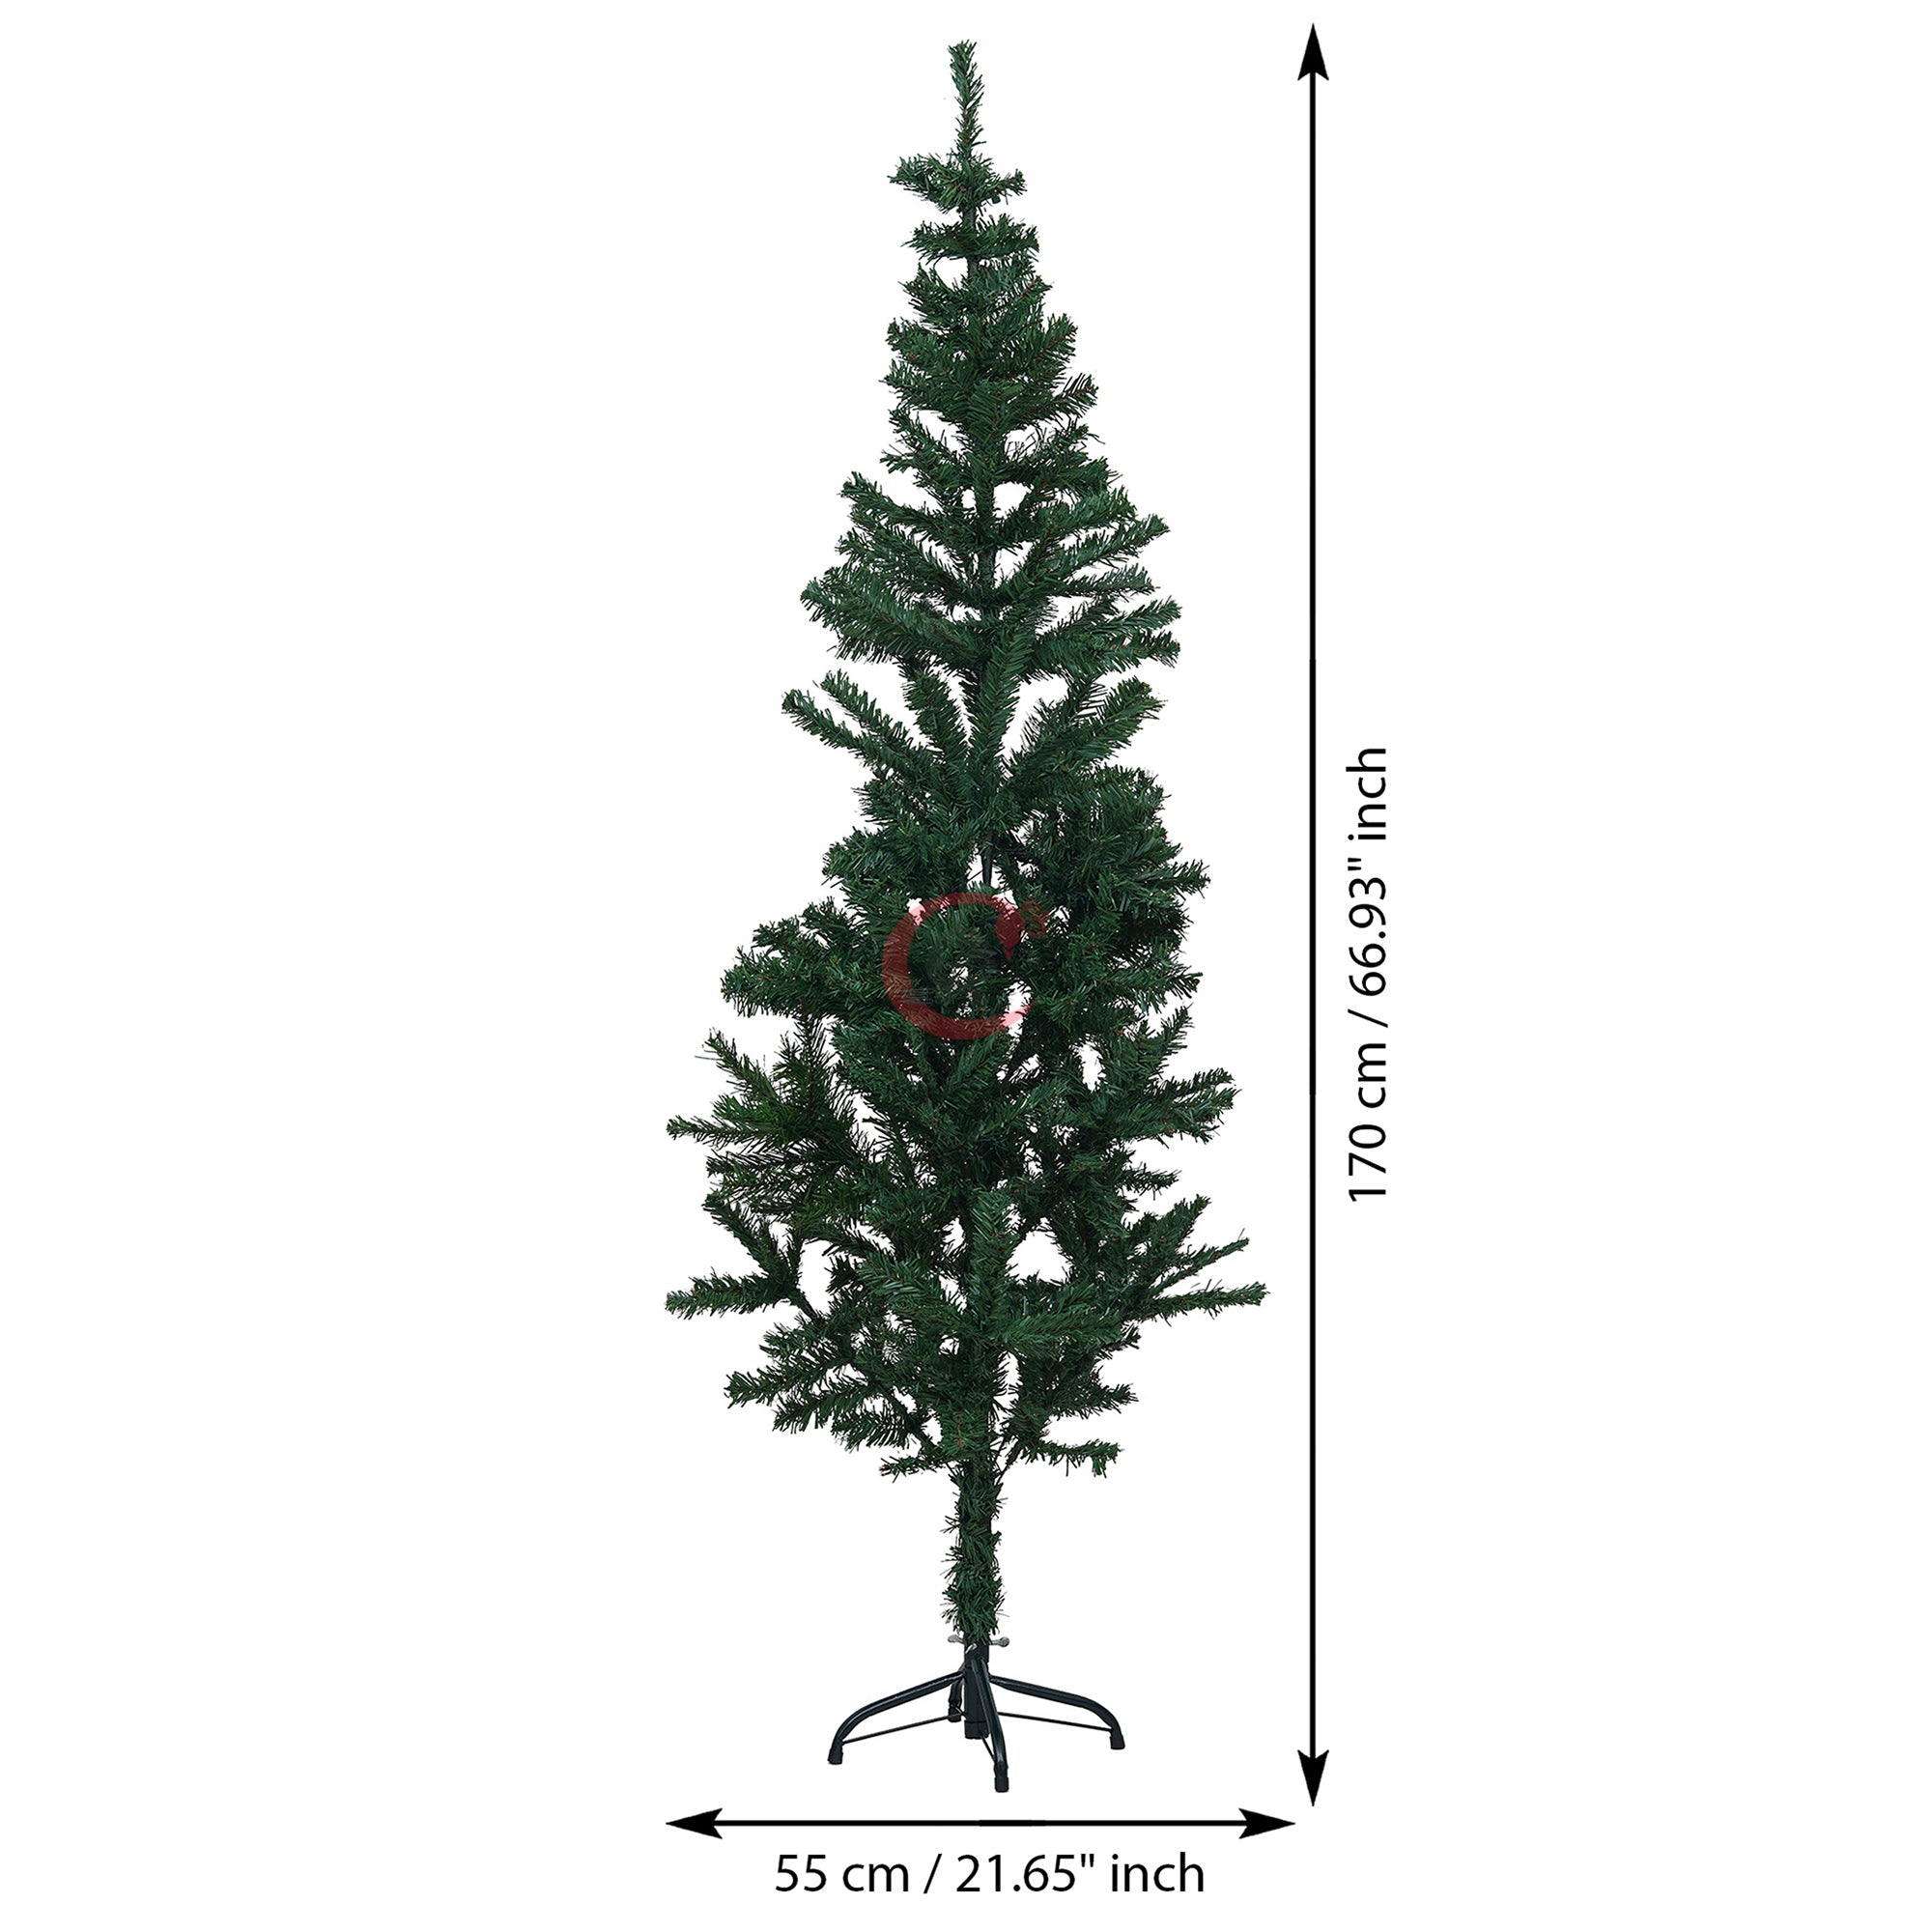 eCraftIndia 5 Feet Green Artificial Christmas Tree Xmas Pine Tree with Metal Stand - Xmas Tree for Indoor, Outdoor, Home, Living Room, Office, Church Decor - Merry Christmas Decoration Item 3